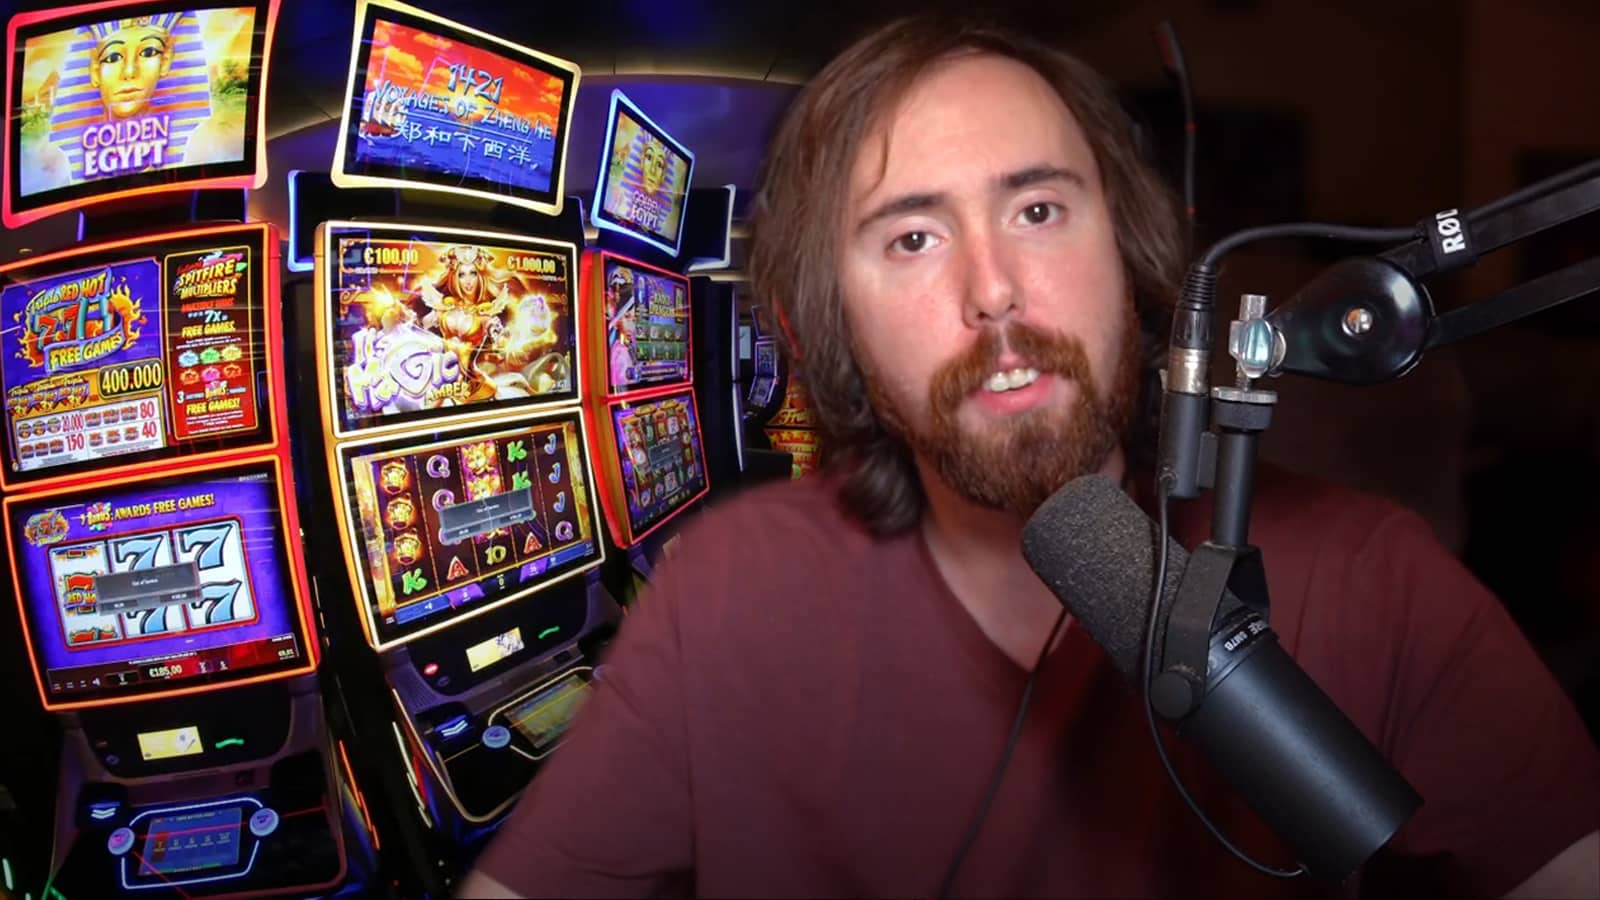 Asmongold demands Twitch take action on gambling streams killing website.